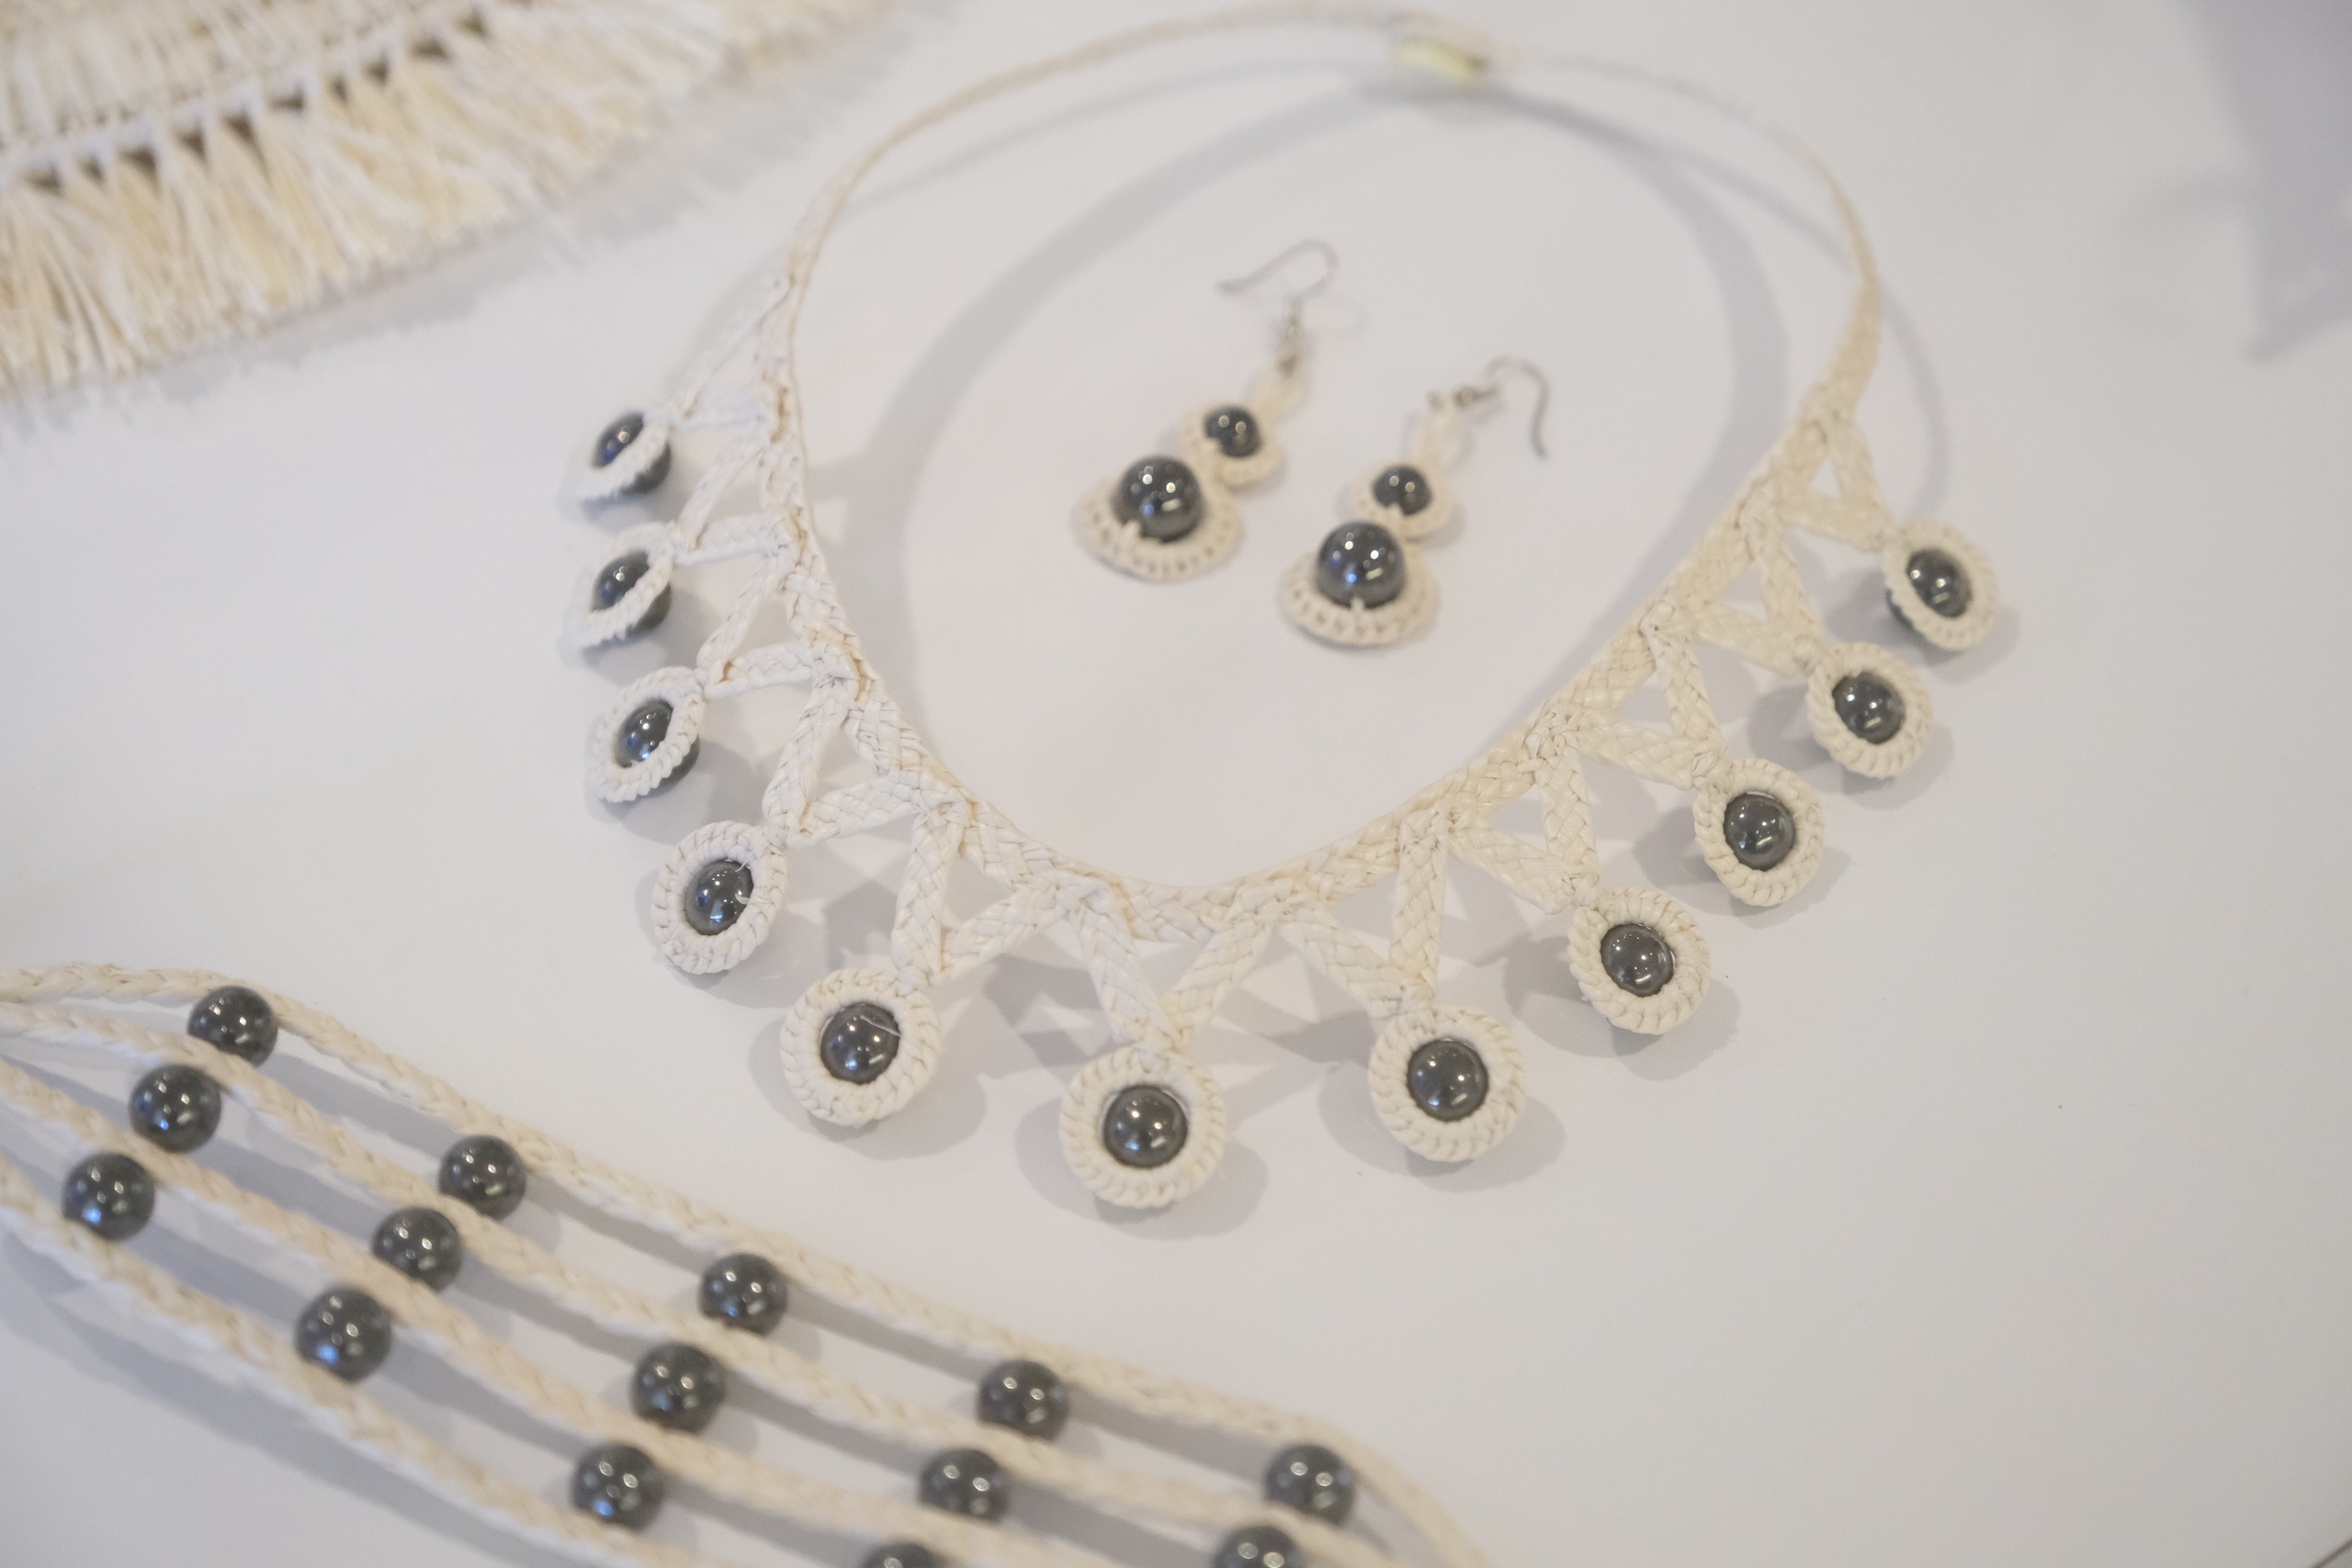 A set of jewelry, including earrings and a necklace.